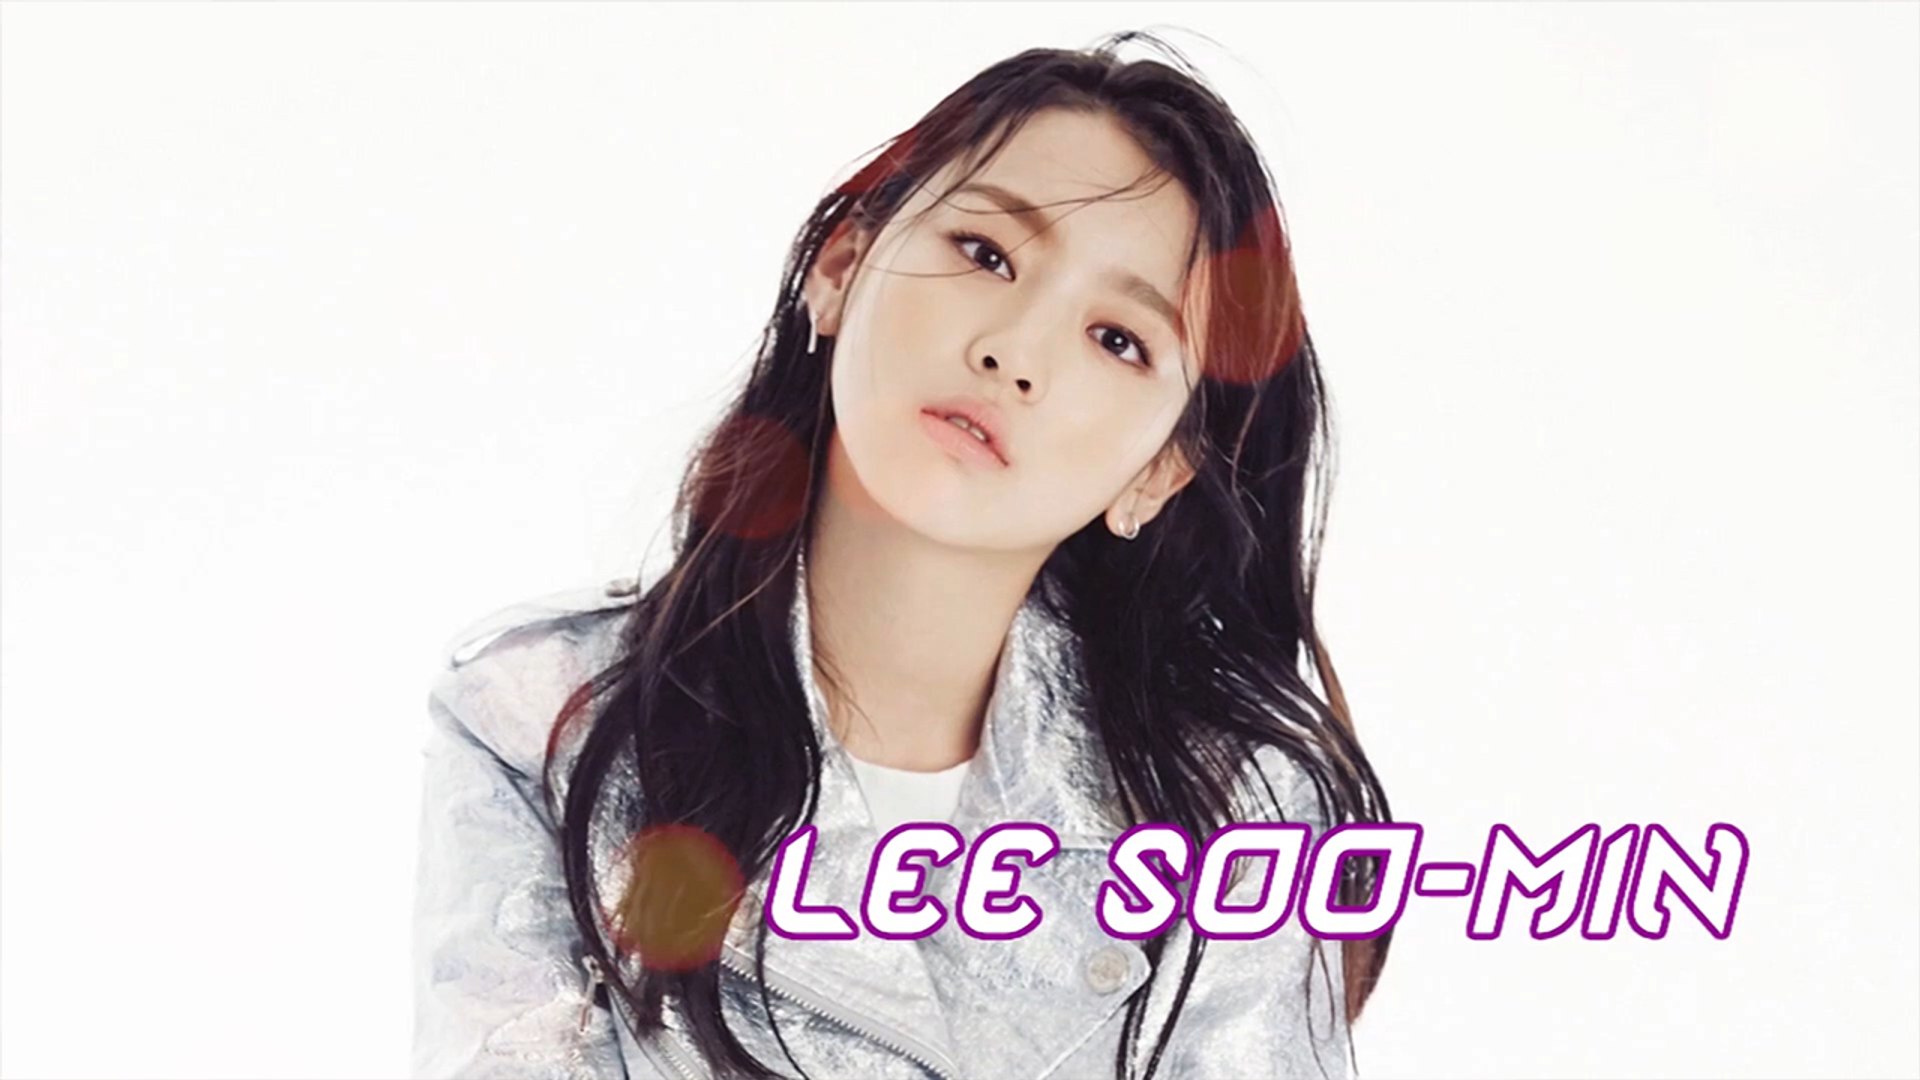 From Produce 101 To MIXNINE: Check Out Lee Soo Min's Full Profile, Career, And Latest News